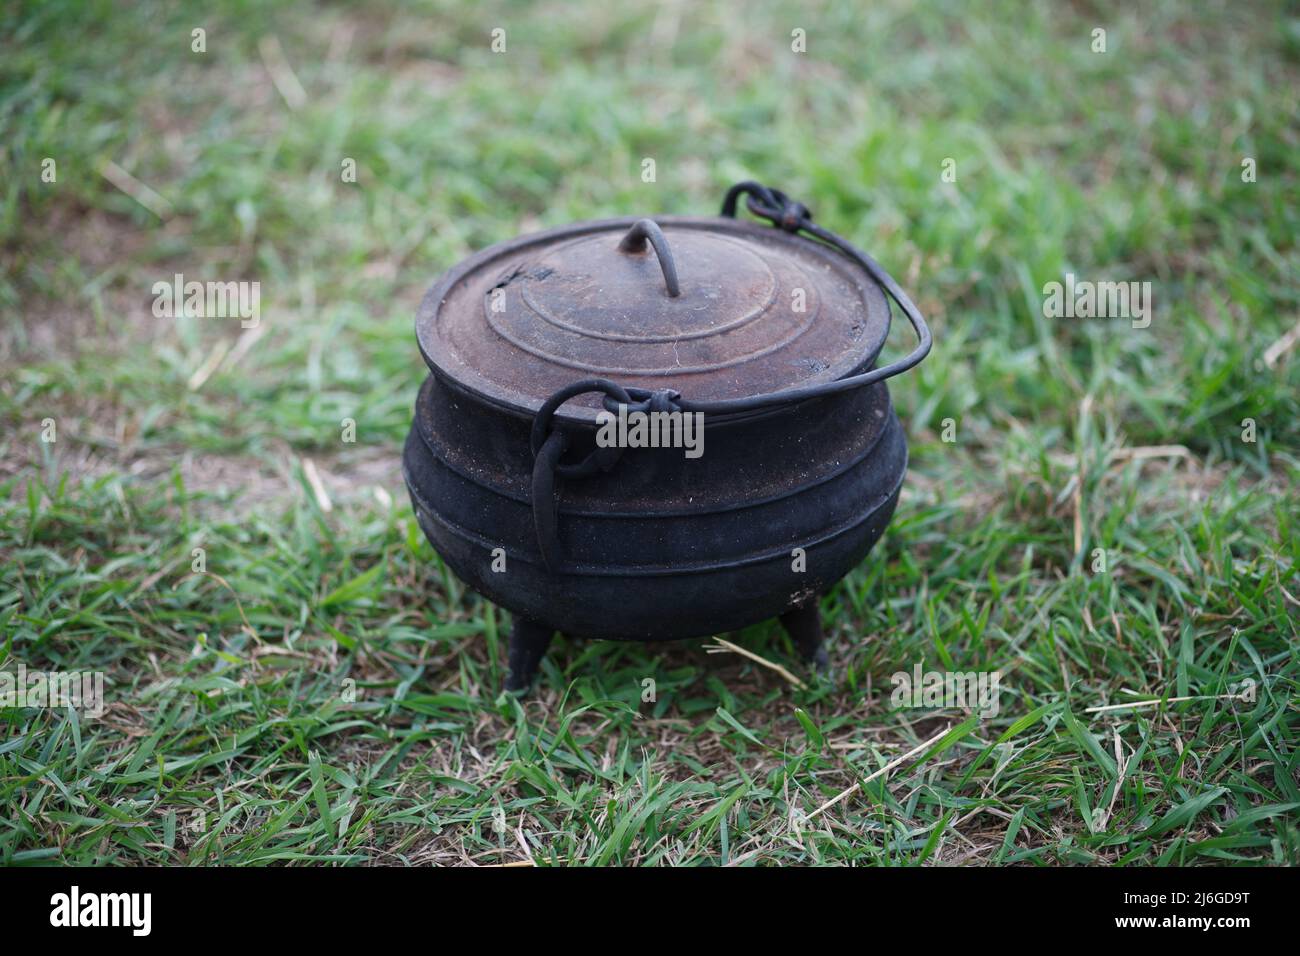 Cooking on fire, pot with food, cooking on a hike. Stock Photo